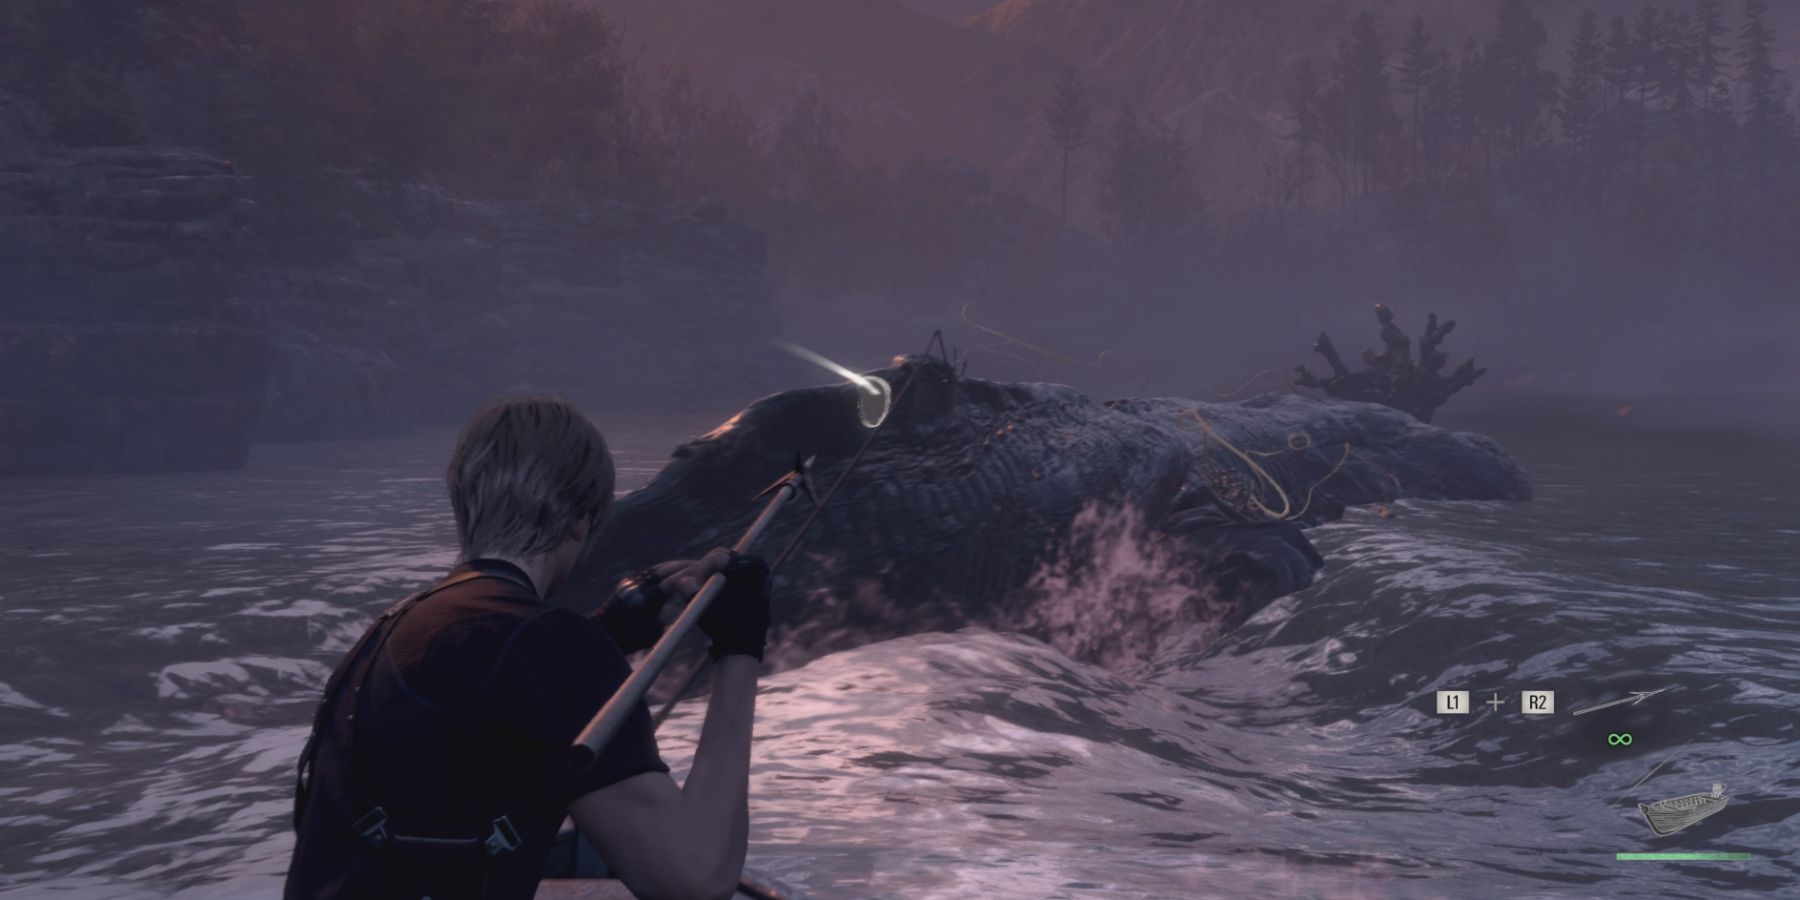 Leon aims a harpoon at Del Lago in Resident Evil 4 remake